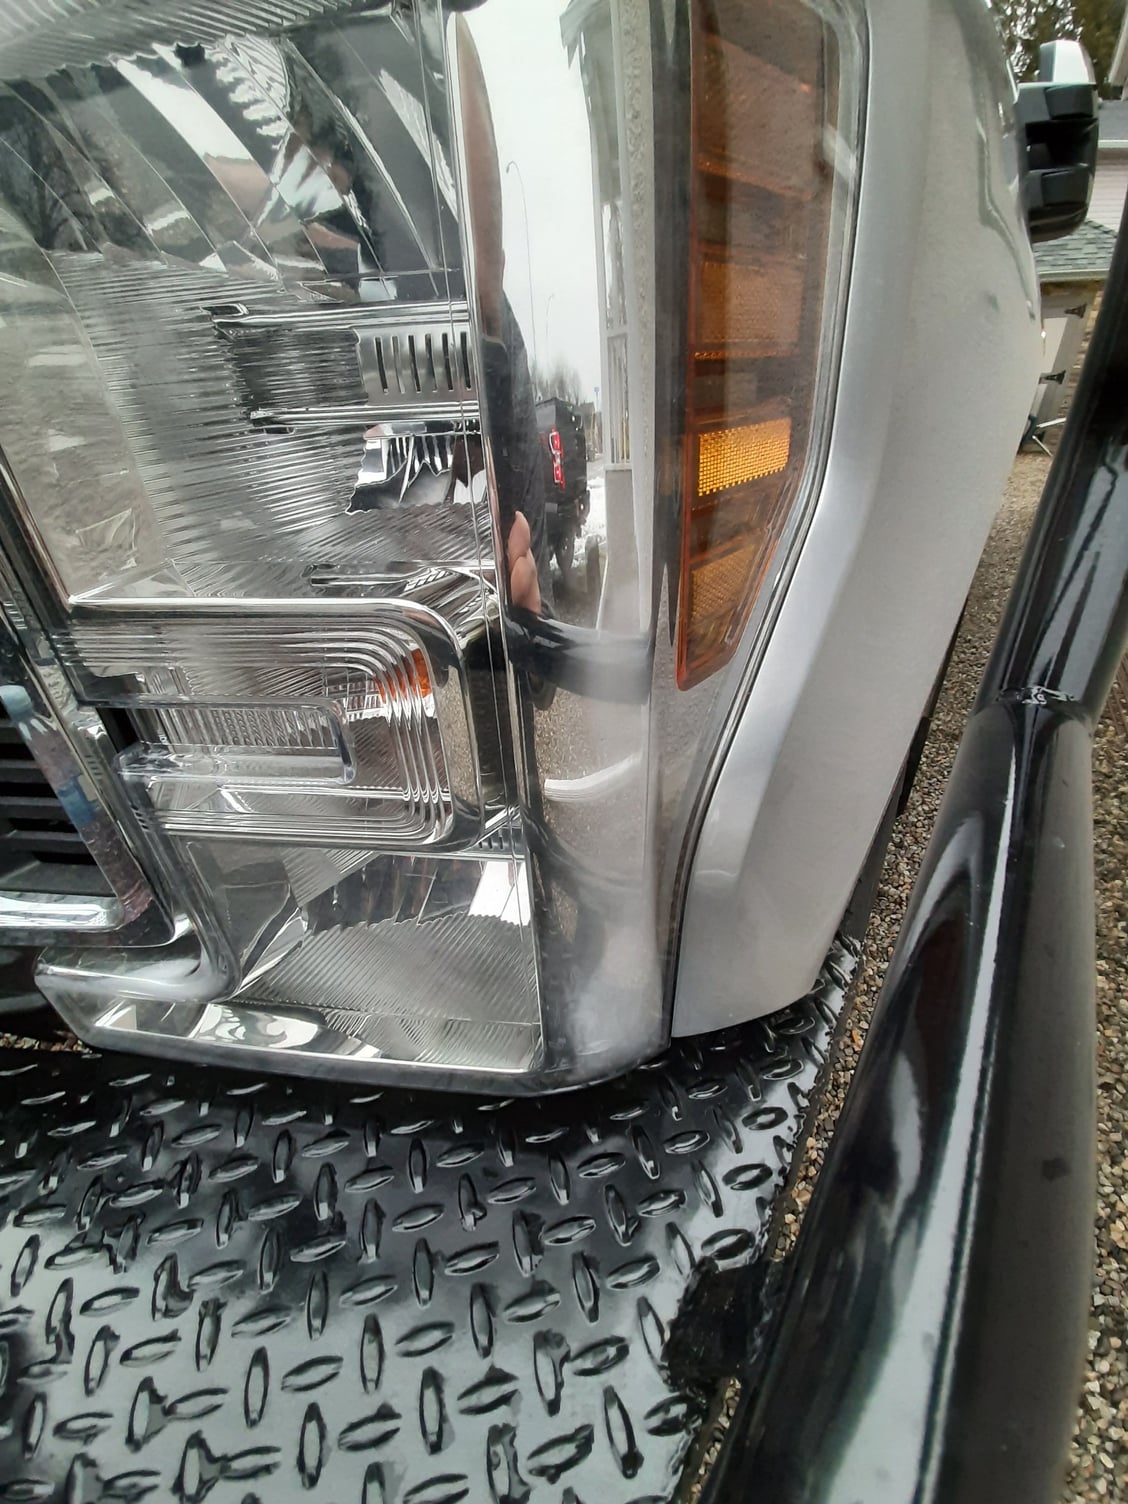 New 2019 F250, headlights "fogging up" - Ford Truck Enthusiasts Forums